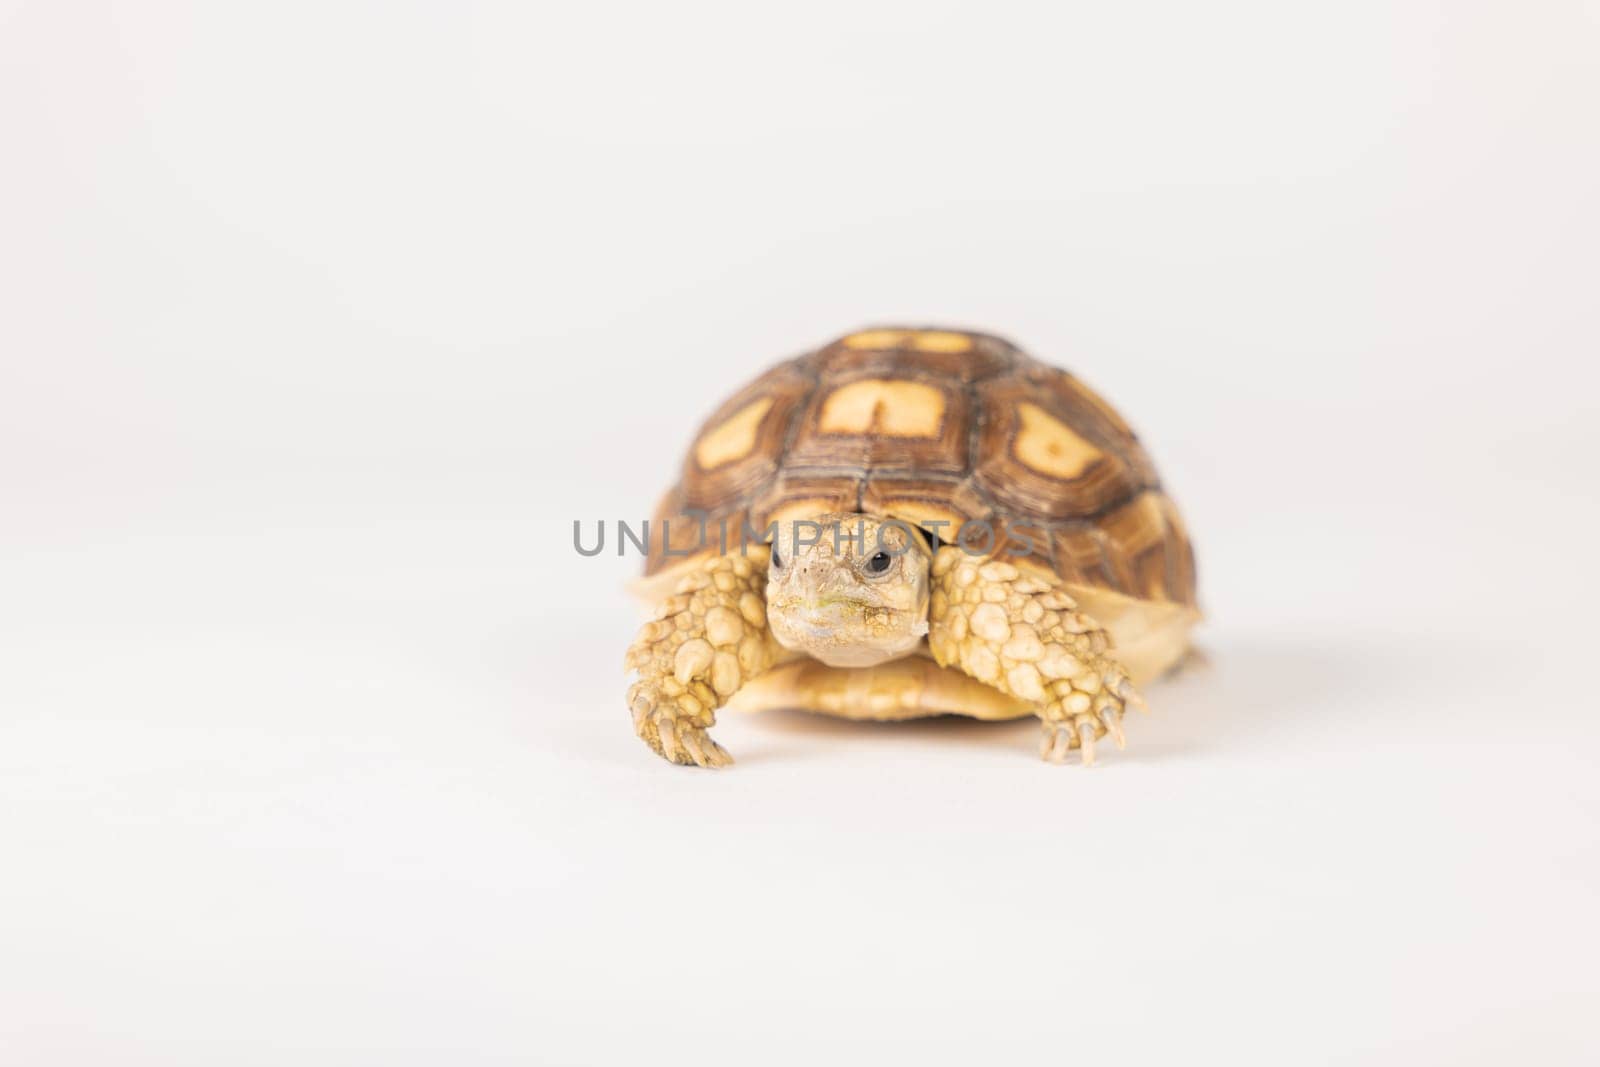 African spurred tortoise, or sulcata tortoise, is featured in this isolated portrait, emphasizing the beauty of its unique design and cute features against a white background. by Sorapop